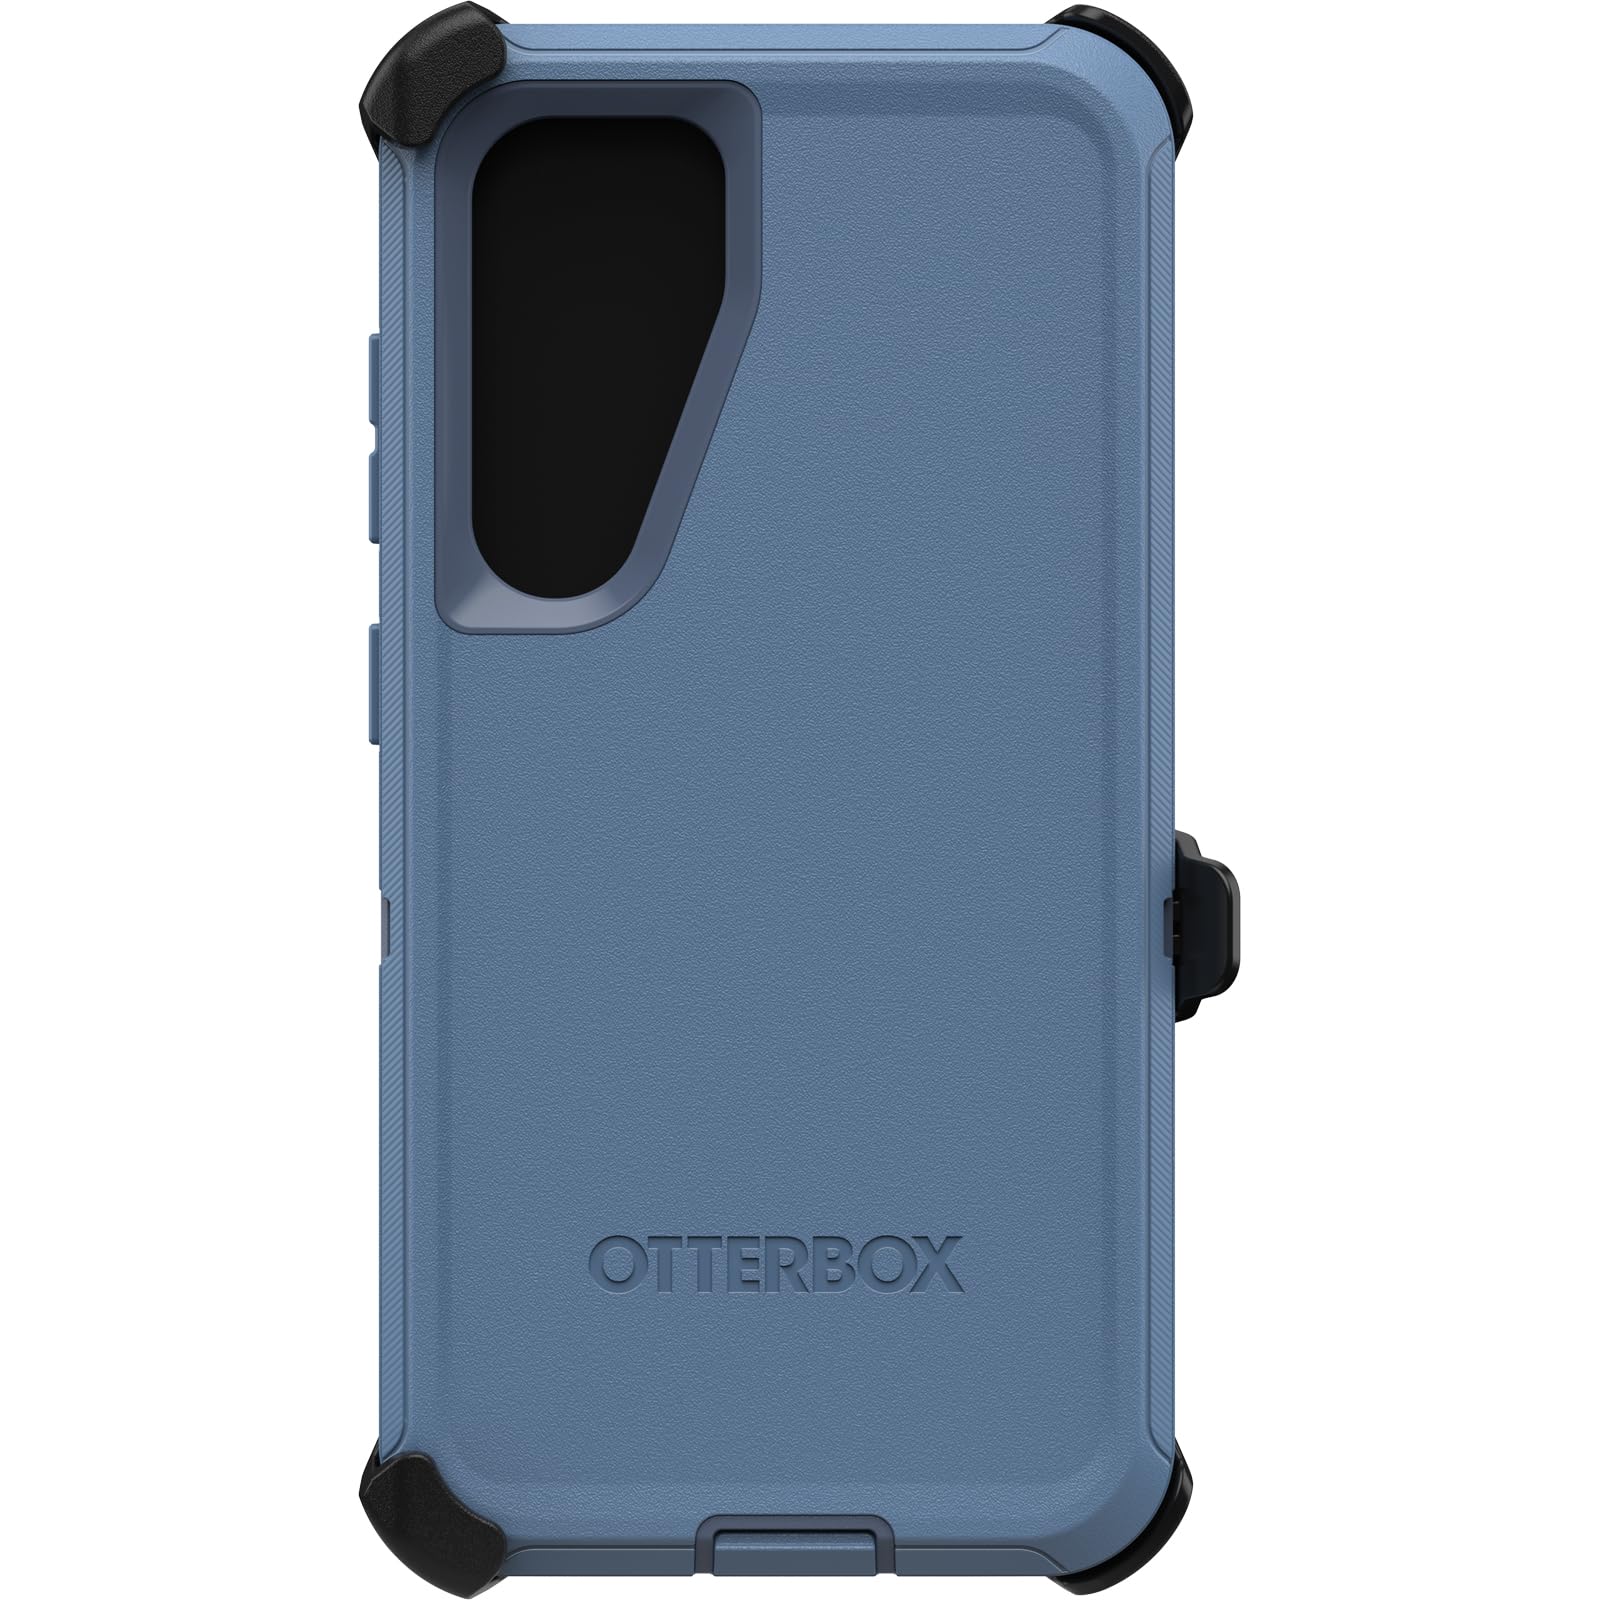 OtterBox Samsung Galaxy S24 Defender Series Case - Baby Blue Jeans, Rugged & Durable, with Port Protection, Includes Holster Clip Kickstand